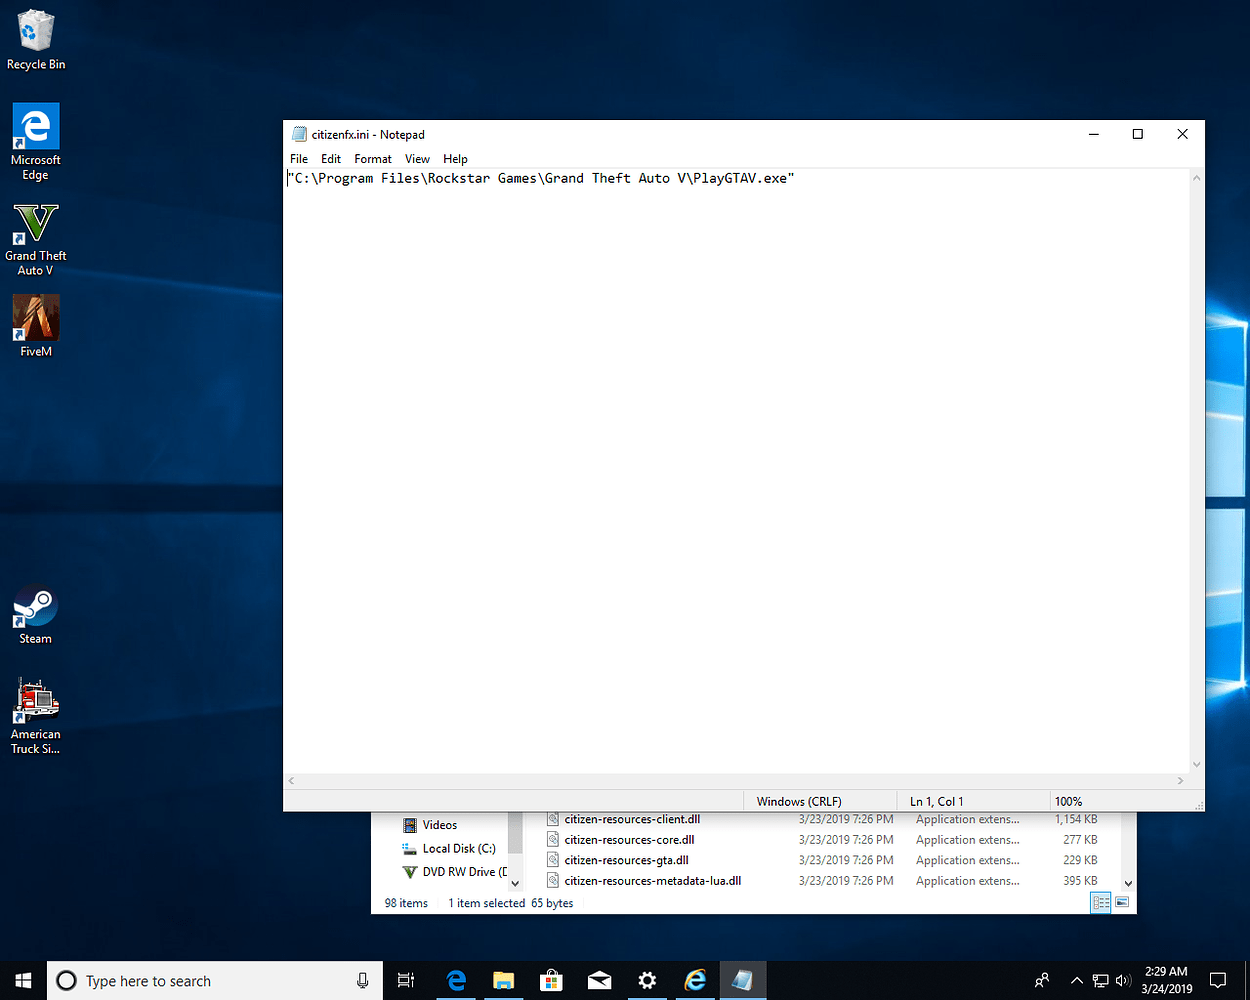 cannot download exe files